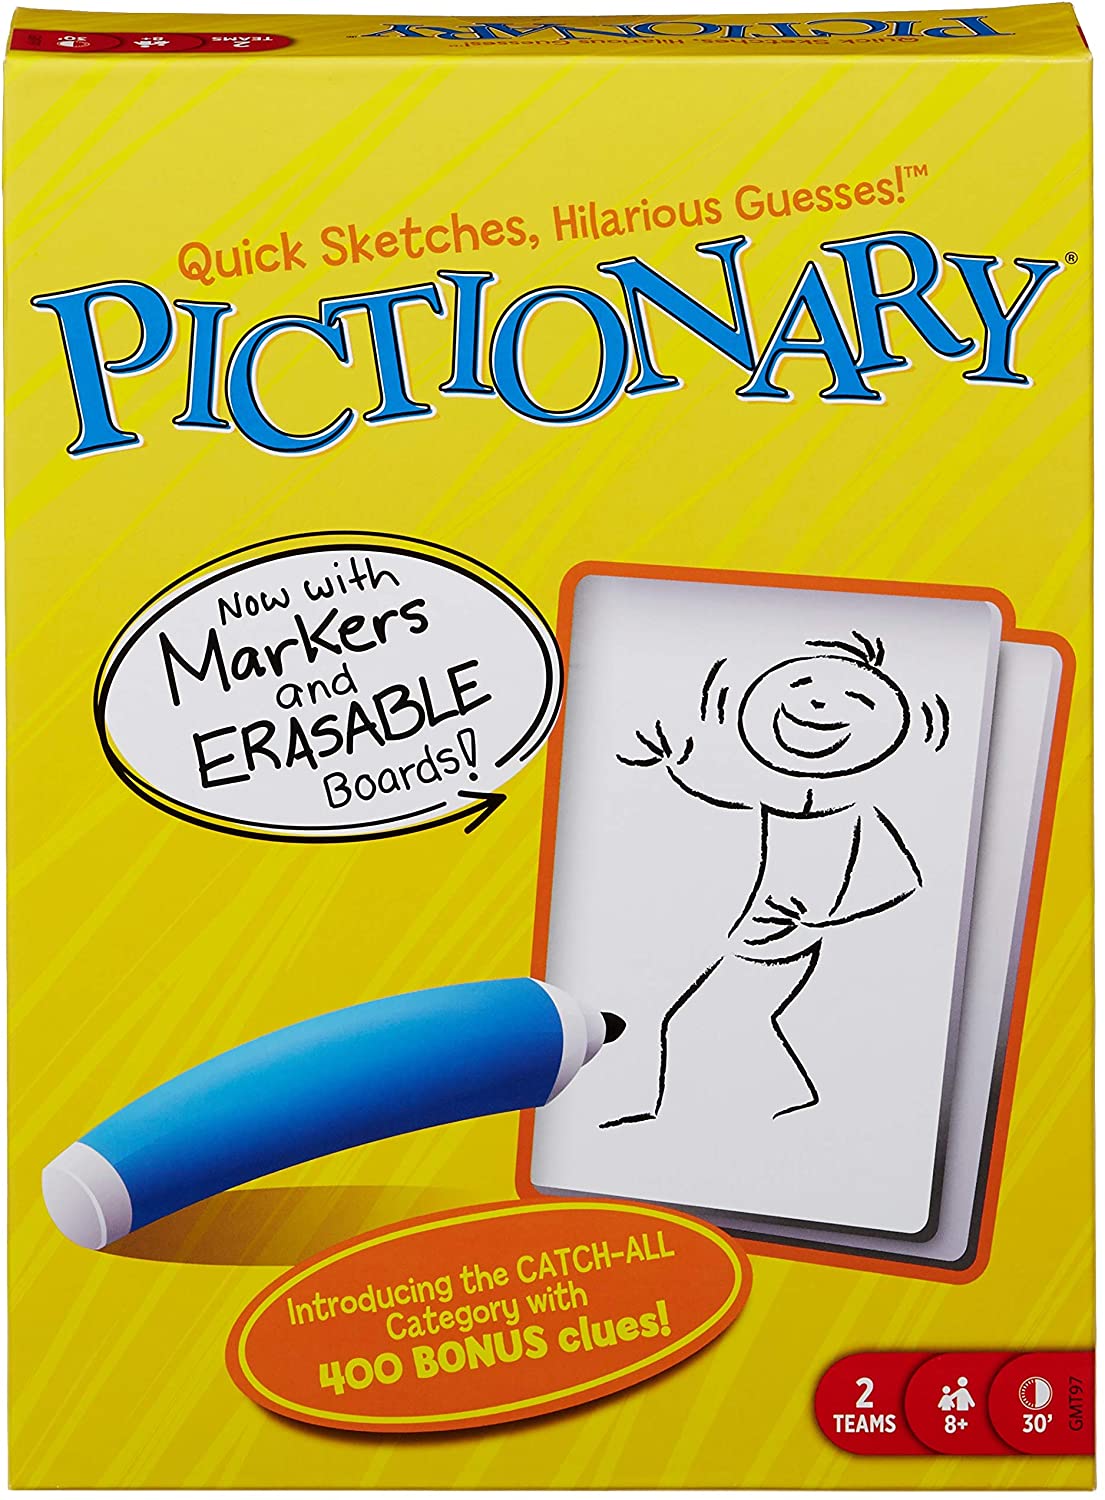 Pictionary Game (With Markers and Erasable Board) for ONLY 13.79 (Was